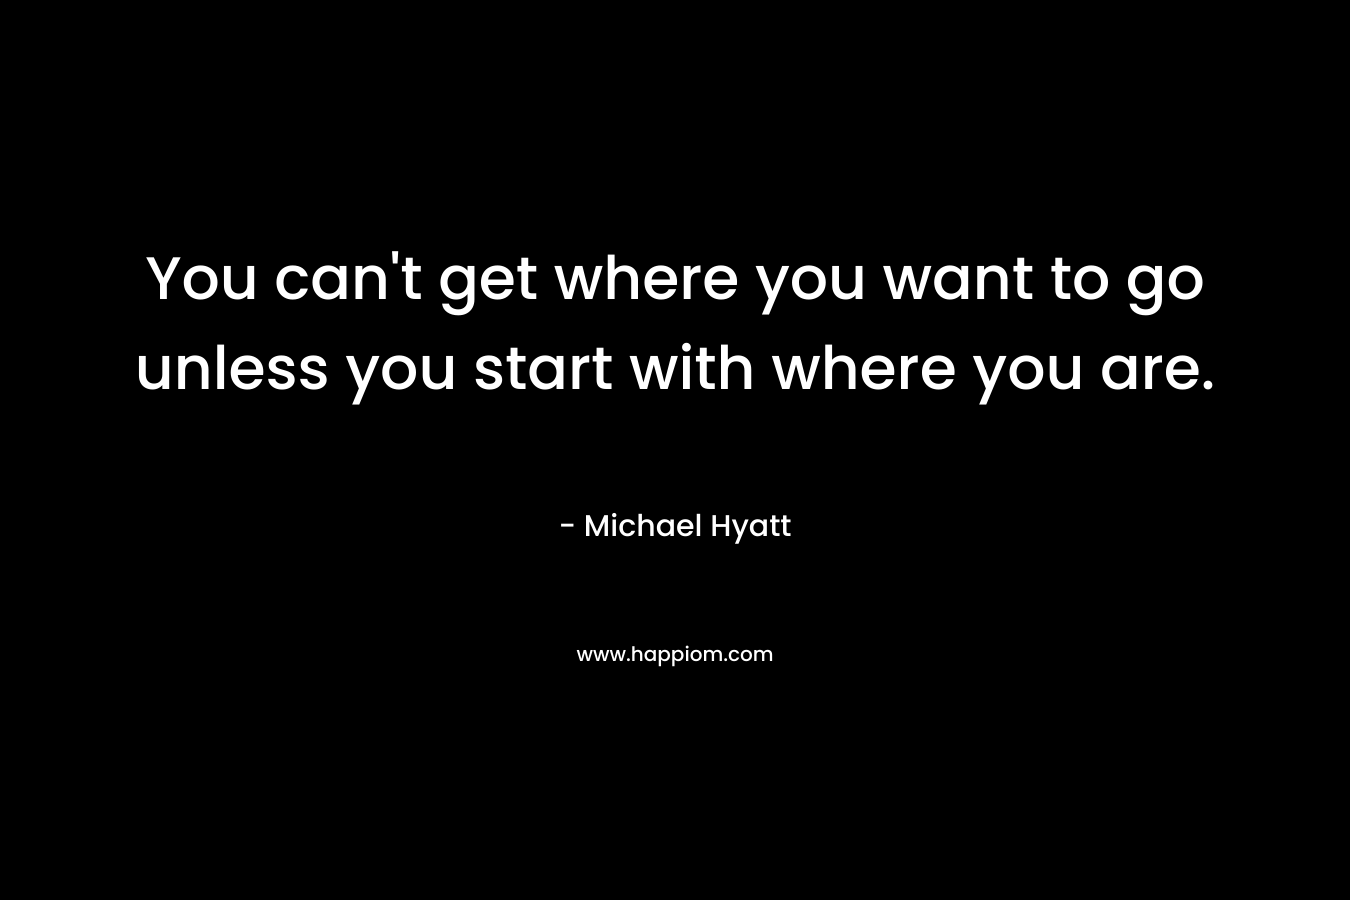 You can't get where you want to go unless you start with where you are.